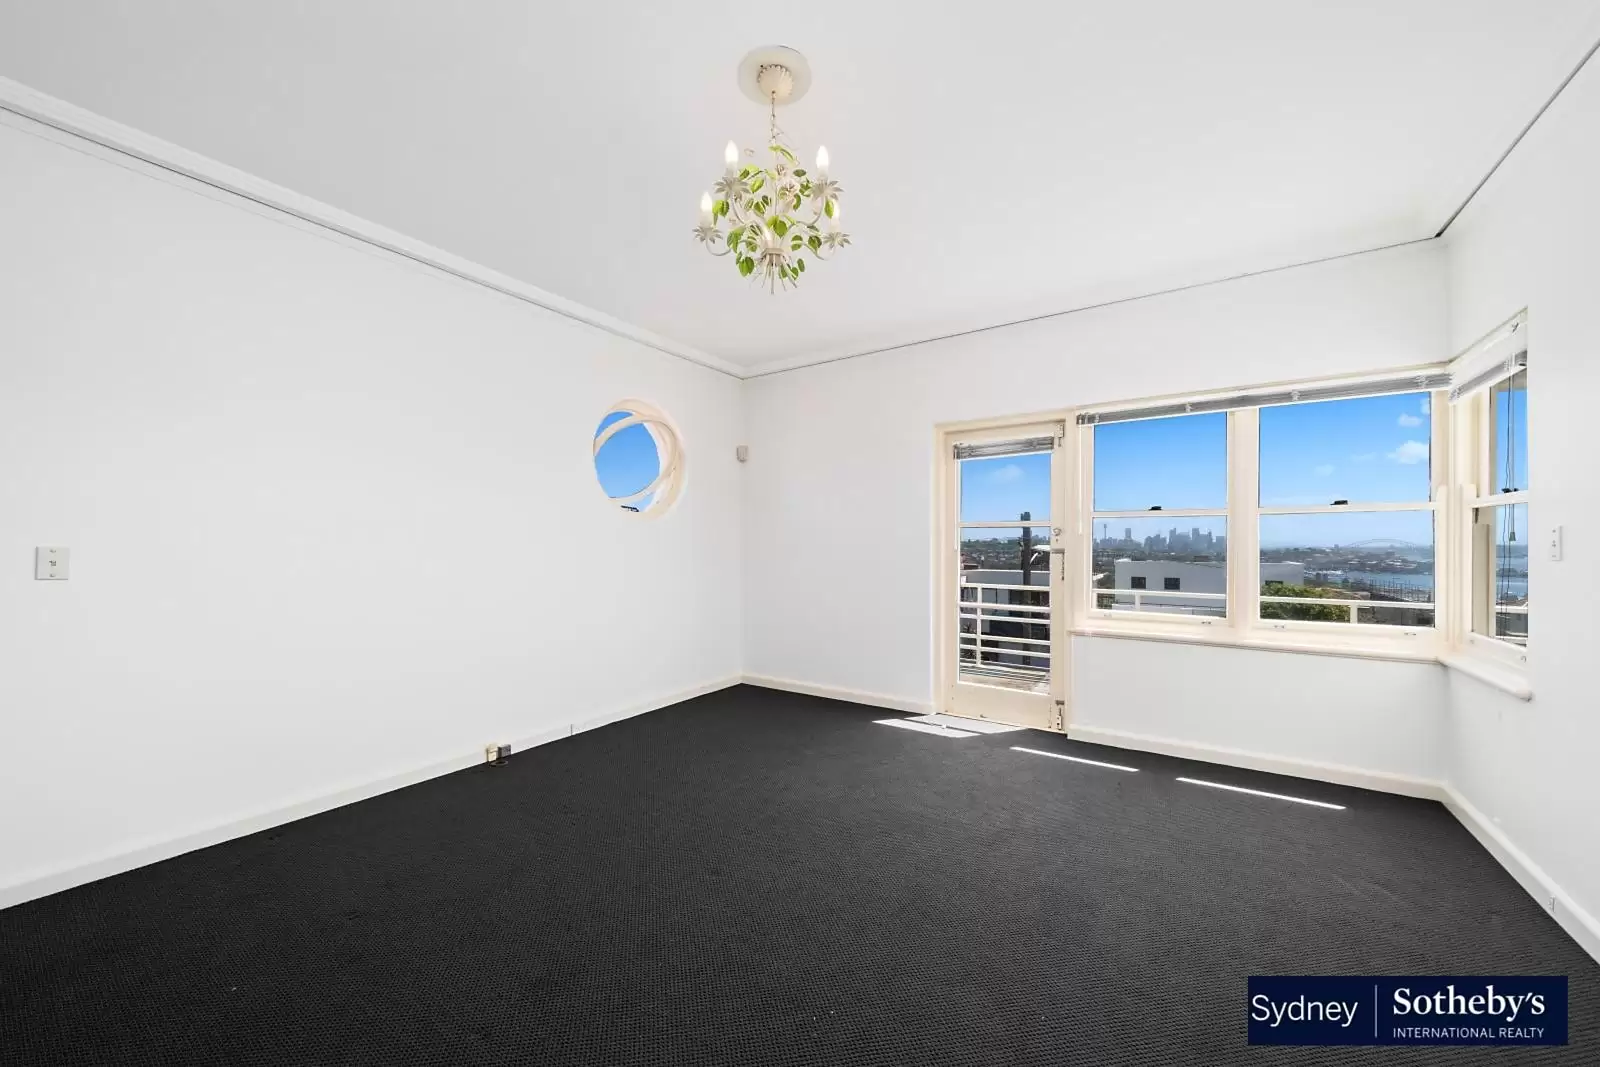 2 Wallangra Road, Dover Heights Leased by Sydney Sotheby's International Realty - image 5